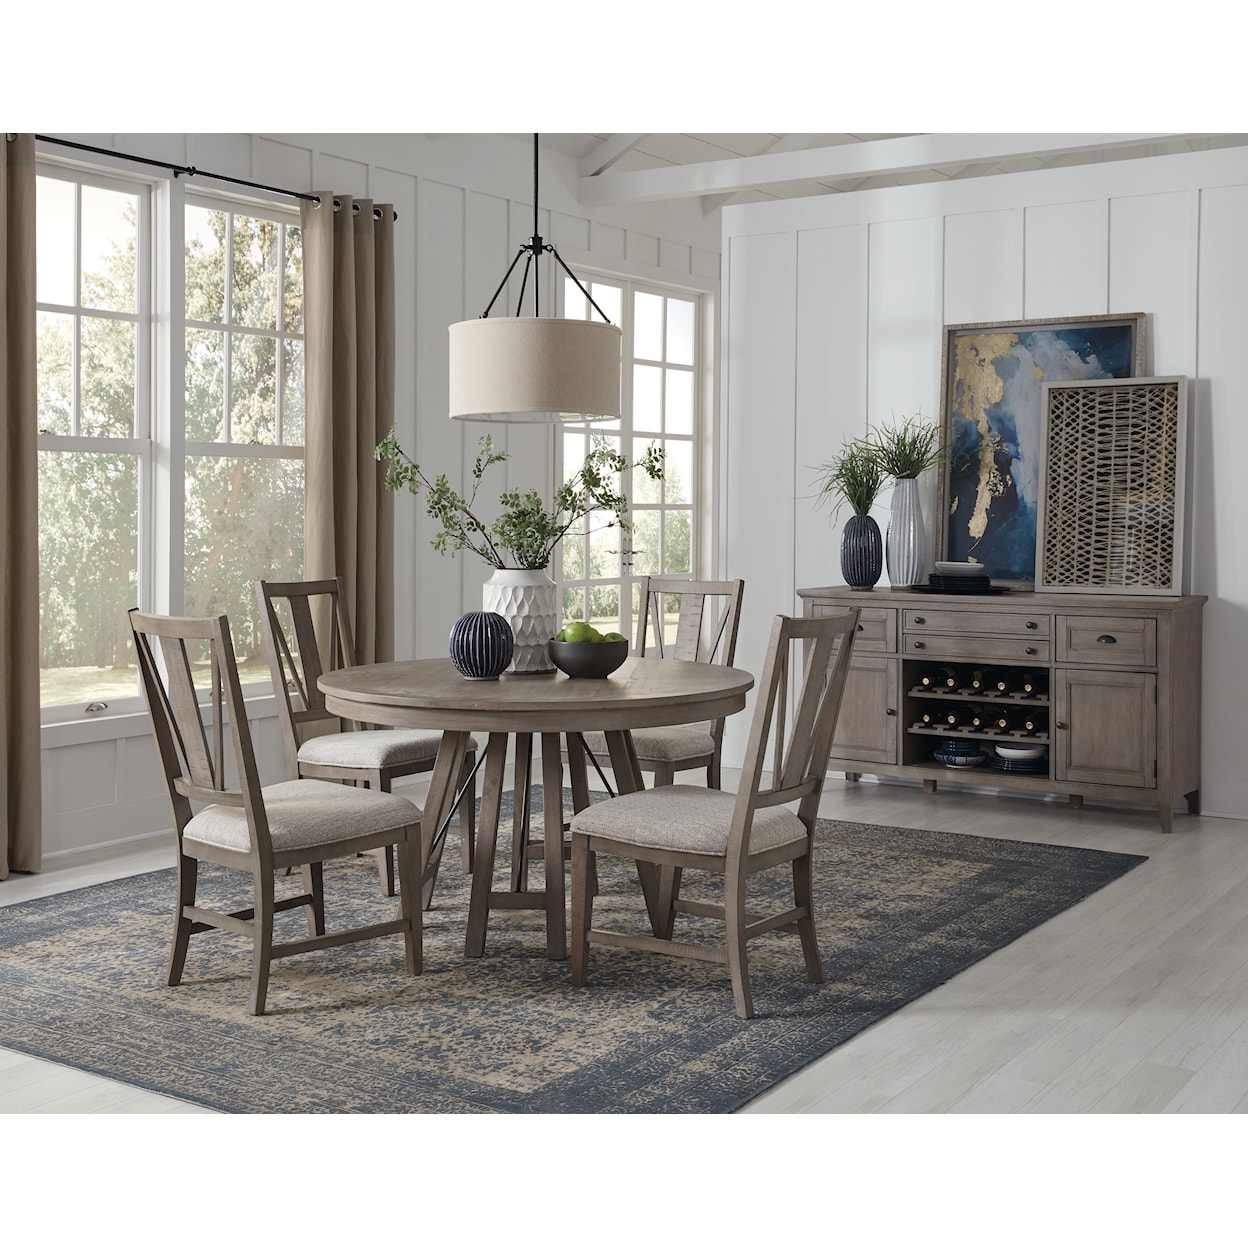 Magnussen Home Paxton Place Dining Dining Room Group